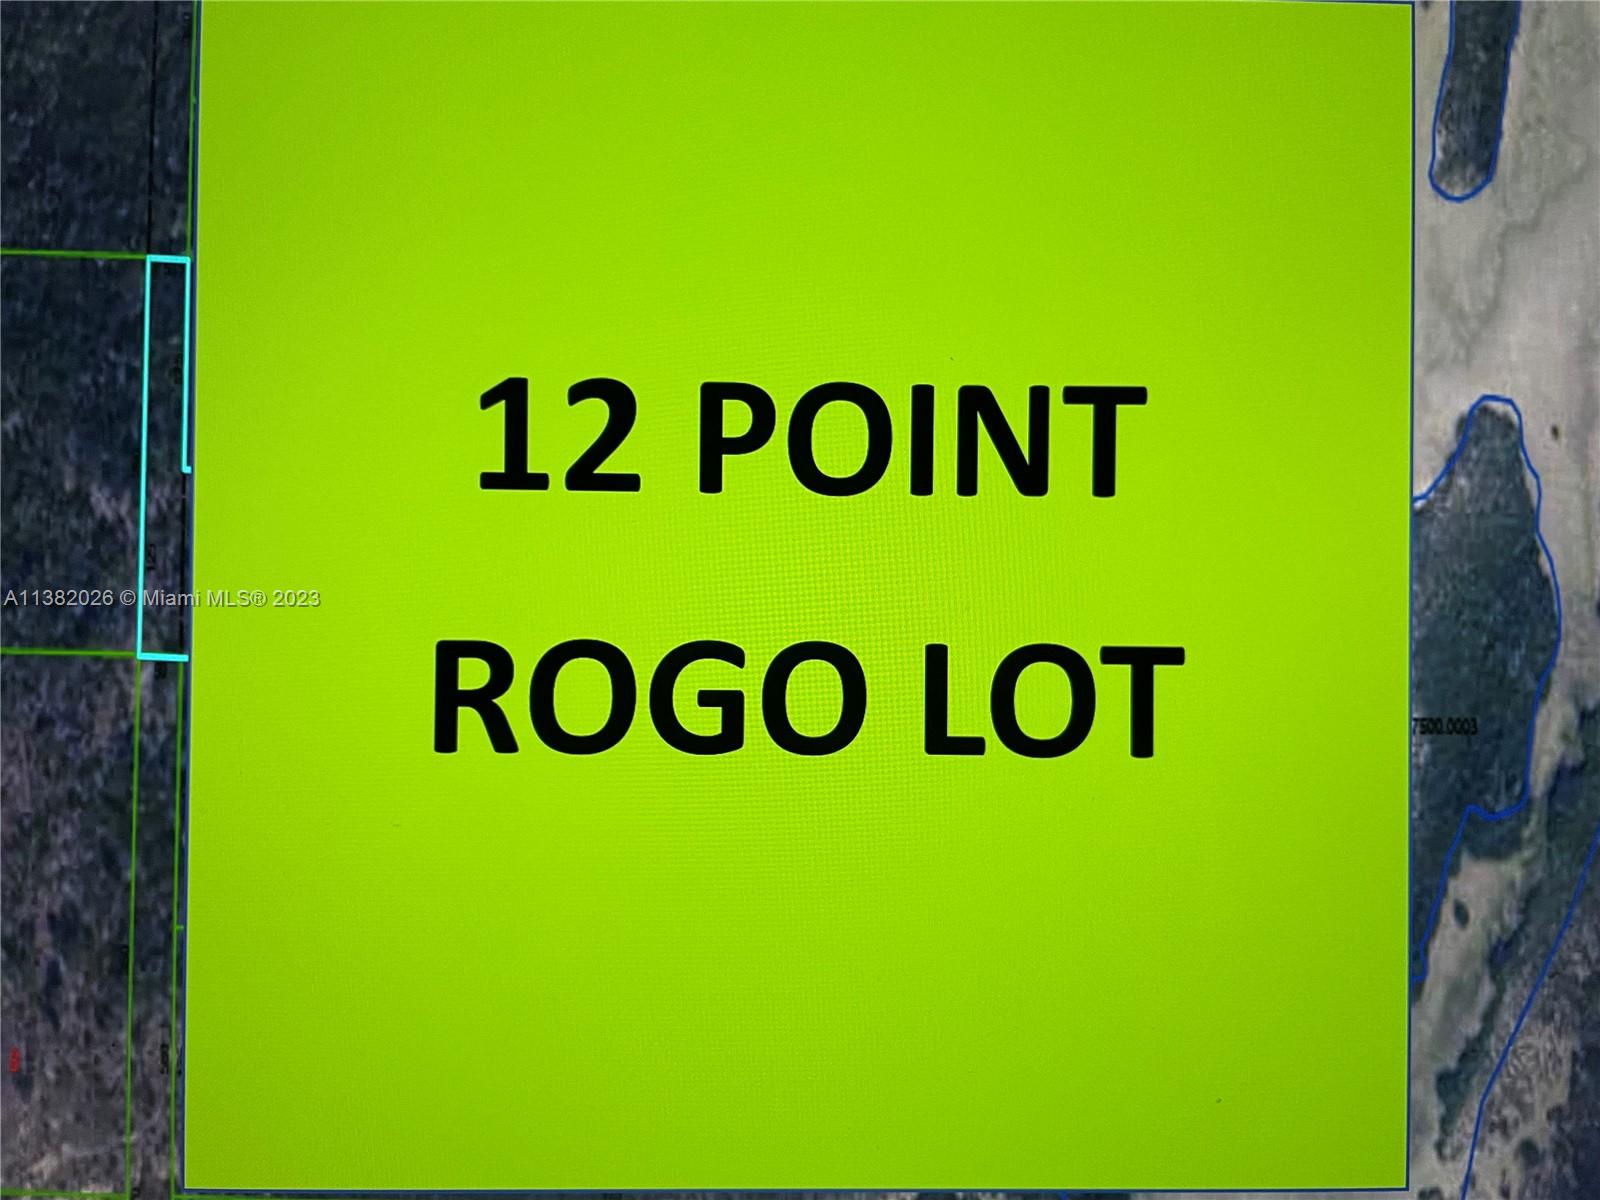 12 POINT ROGO LOT AWAITING FOR LETTER FROM COUNTY. MAKE OFFER CONTINGUENT UPON ROGO POINT VERIFICATION WITH COUNTY. SOLD AS-IS AND BELIEVED TO BE UNABLE TO DEVELOP. BUYER TO CONFIRM ALL INFORMATION. OWNER IS RELATED TO LISTING​​‌​​​​‌​​‌‌​‌‌‌​​‌‌​‌‌‌​​‌‌​‌‌‌ AGENT.